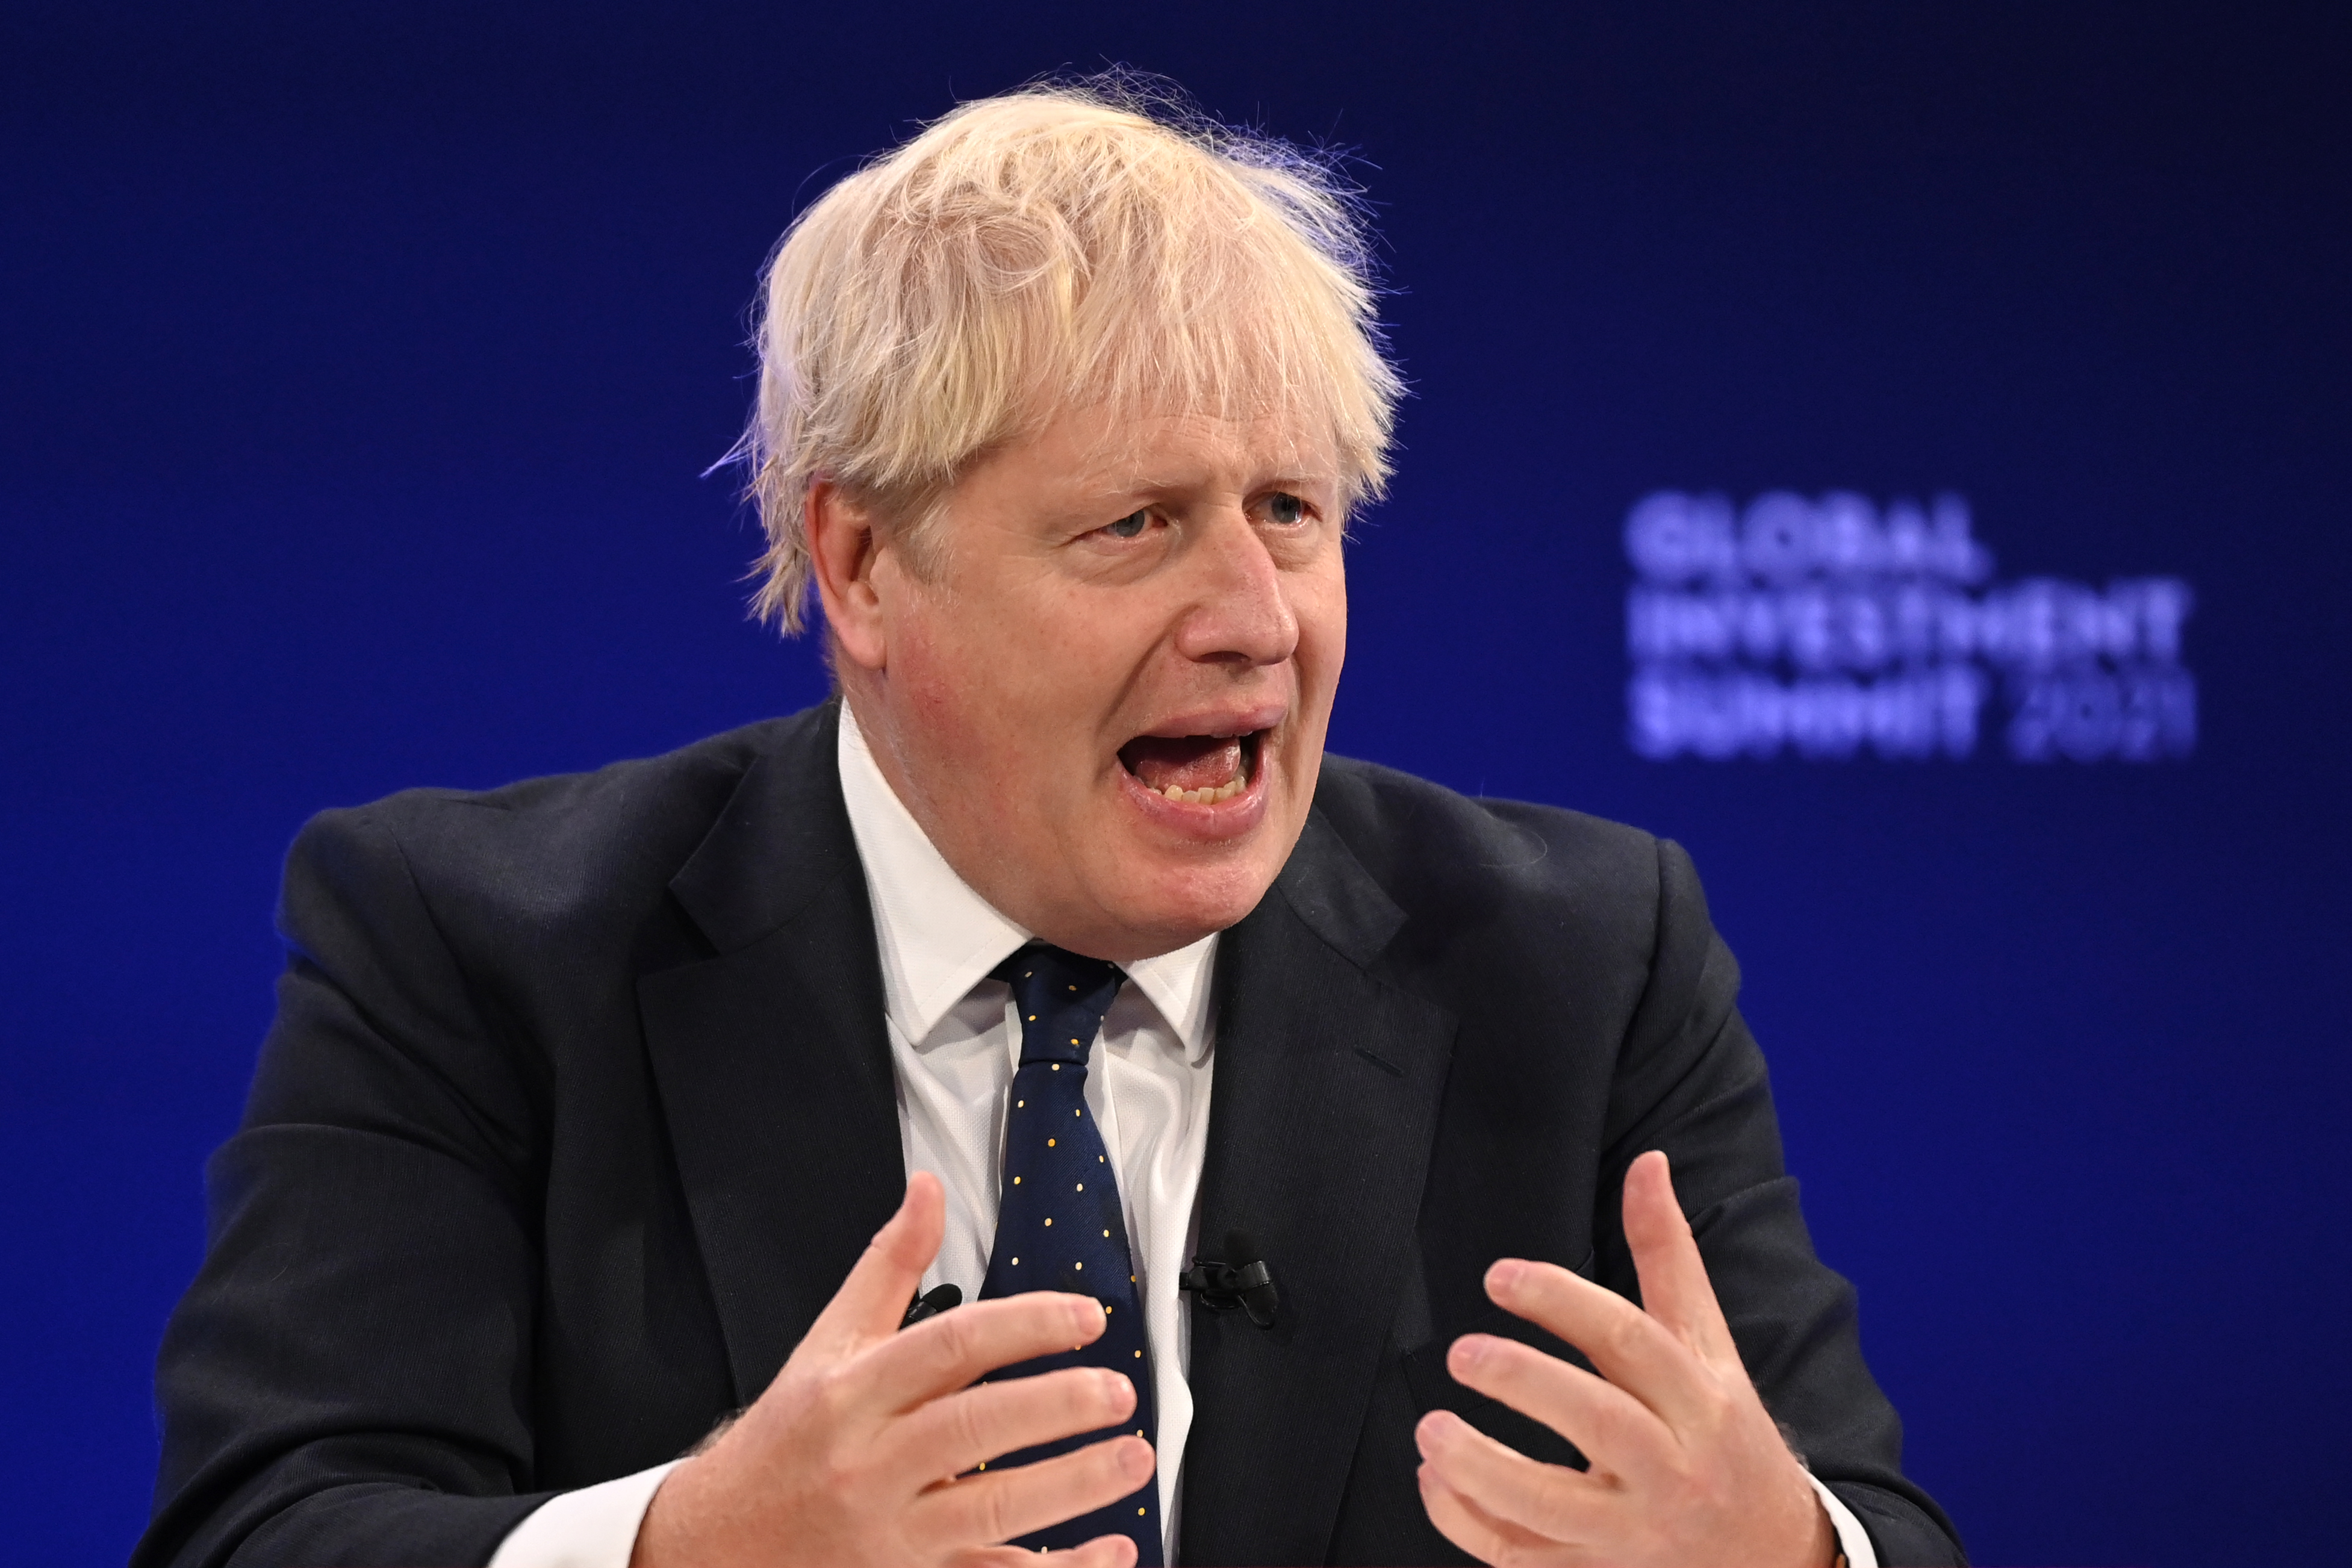 Prime Minister Boris Johnson speaks during the Global Investment Summit at the Science Museum on October 19, 2021 in London, England. (Leon Ne—WPA Pool / Getty Images)